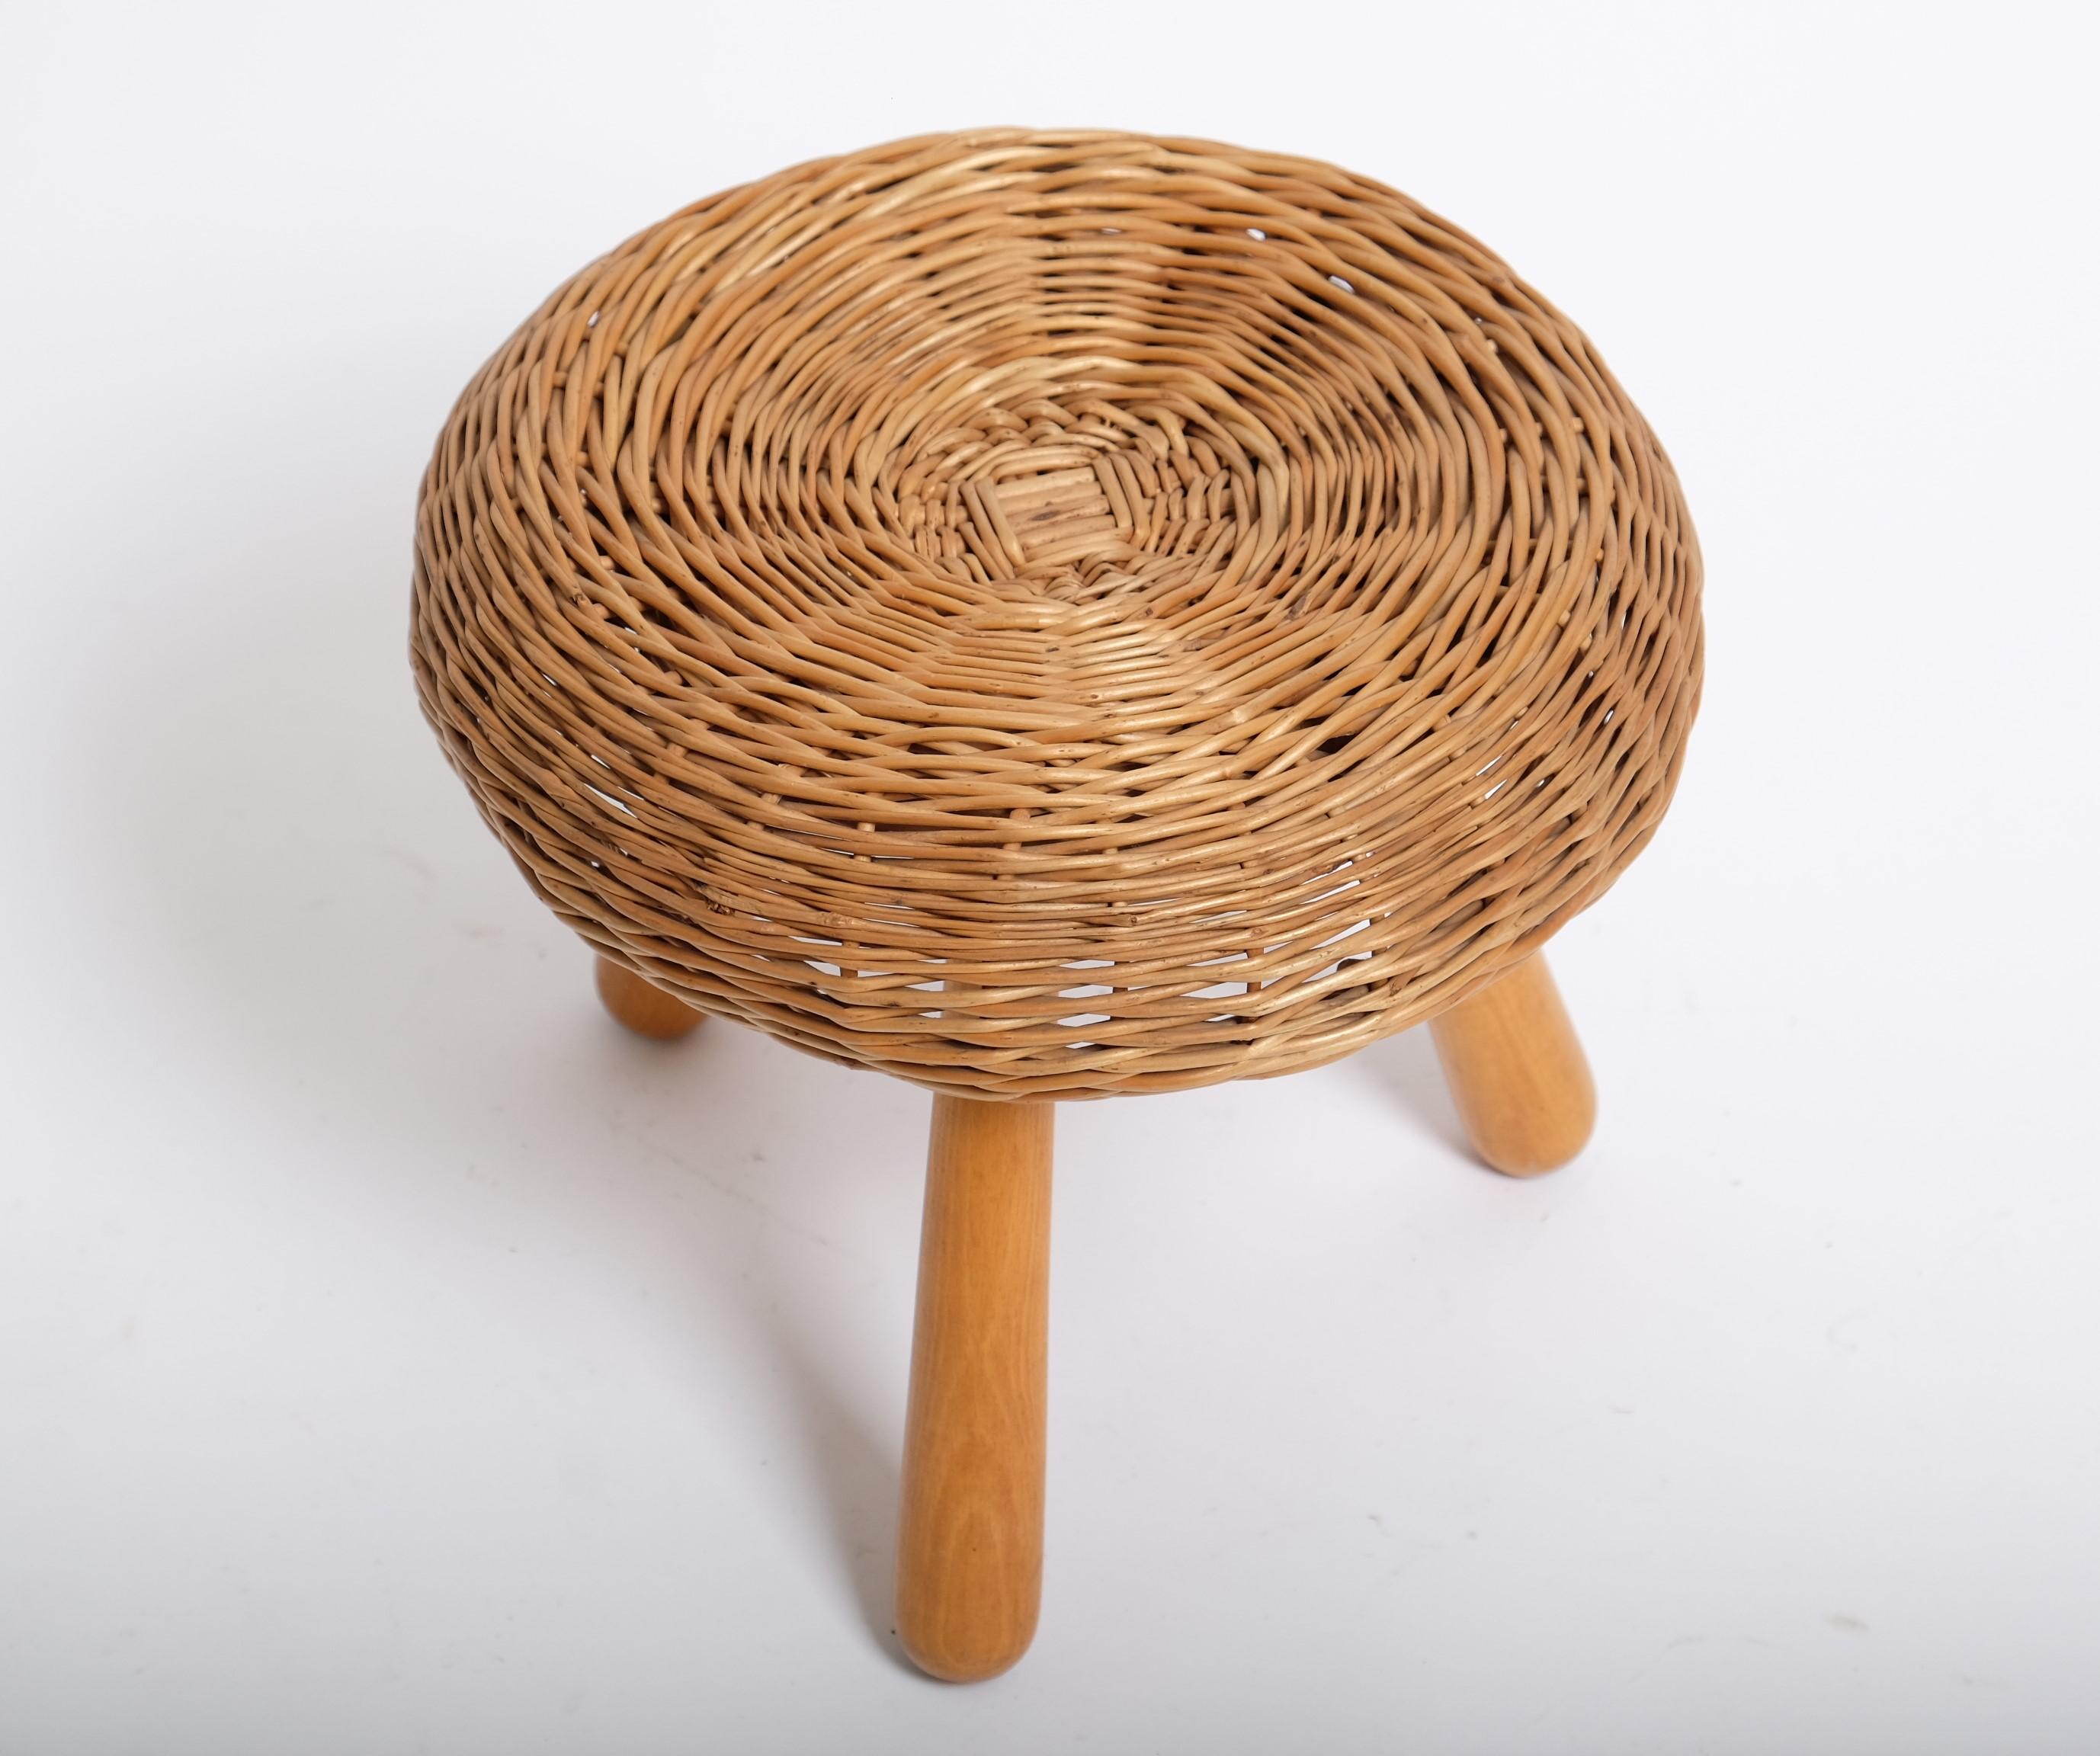 Tony Paul 'Attributed' Stool Wicker Wood, United States 1950s For Sale 2